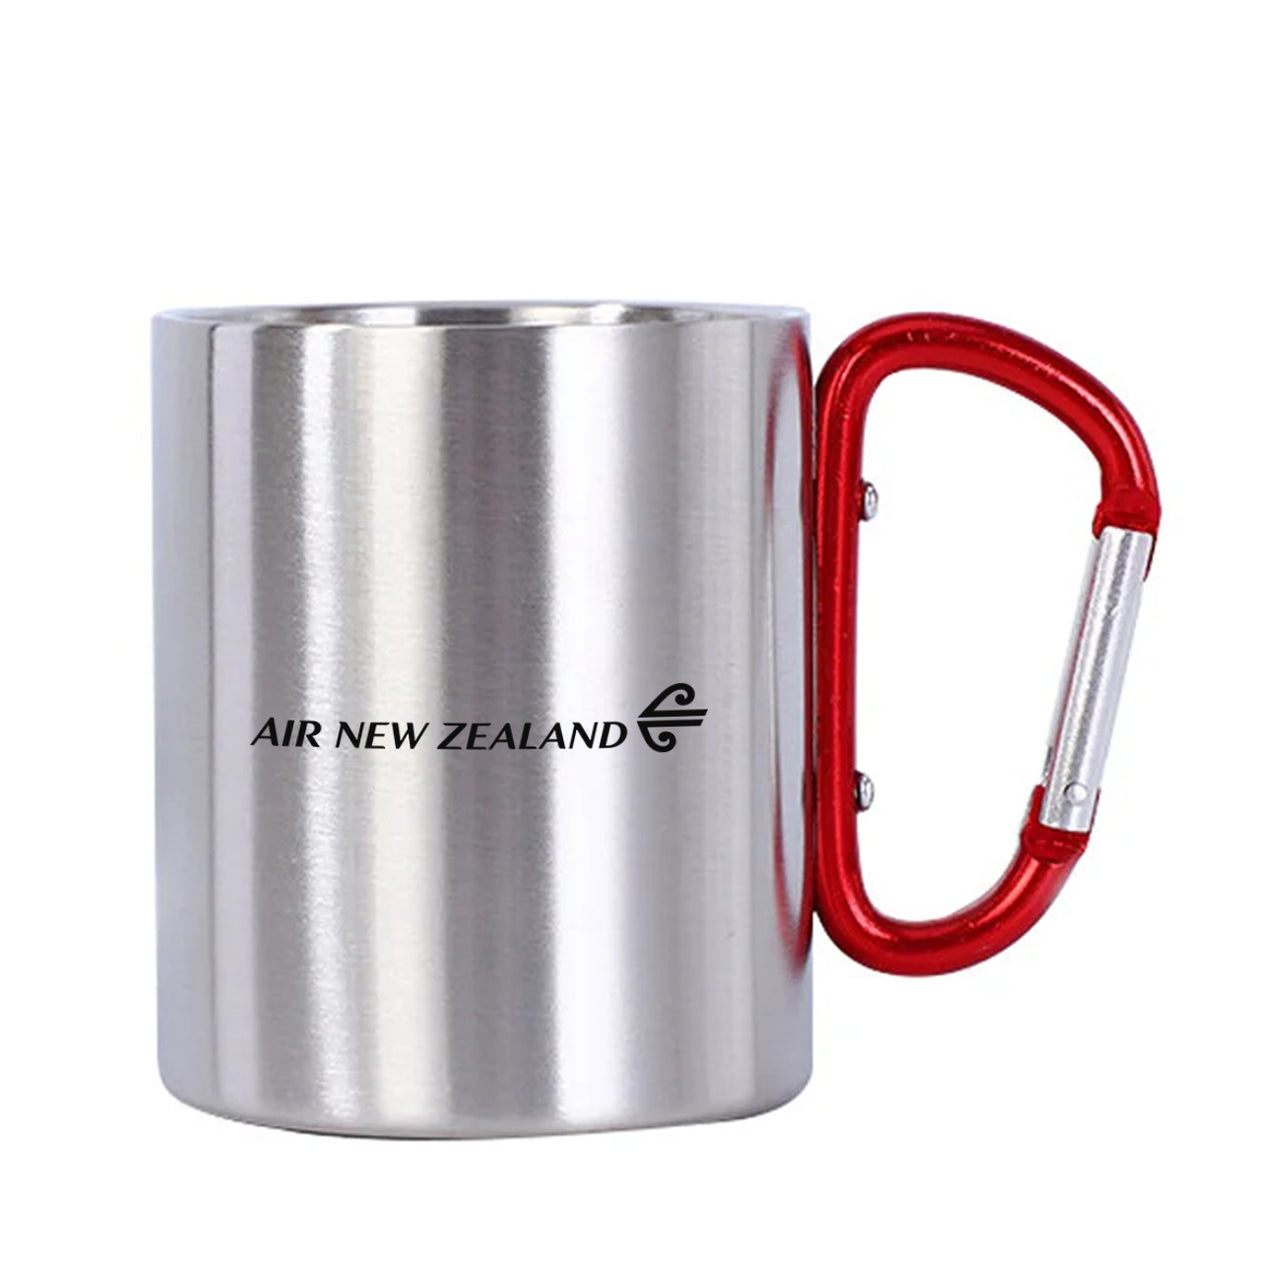 Air New Zealand Airlines Designed Stainless Steel Outdoors Mugs